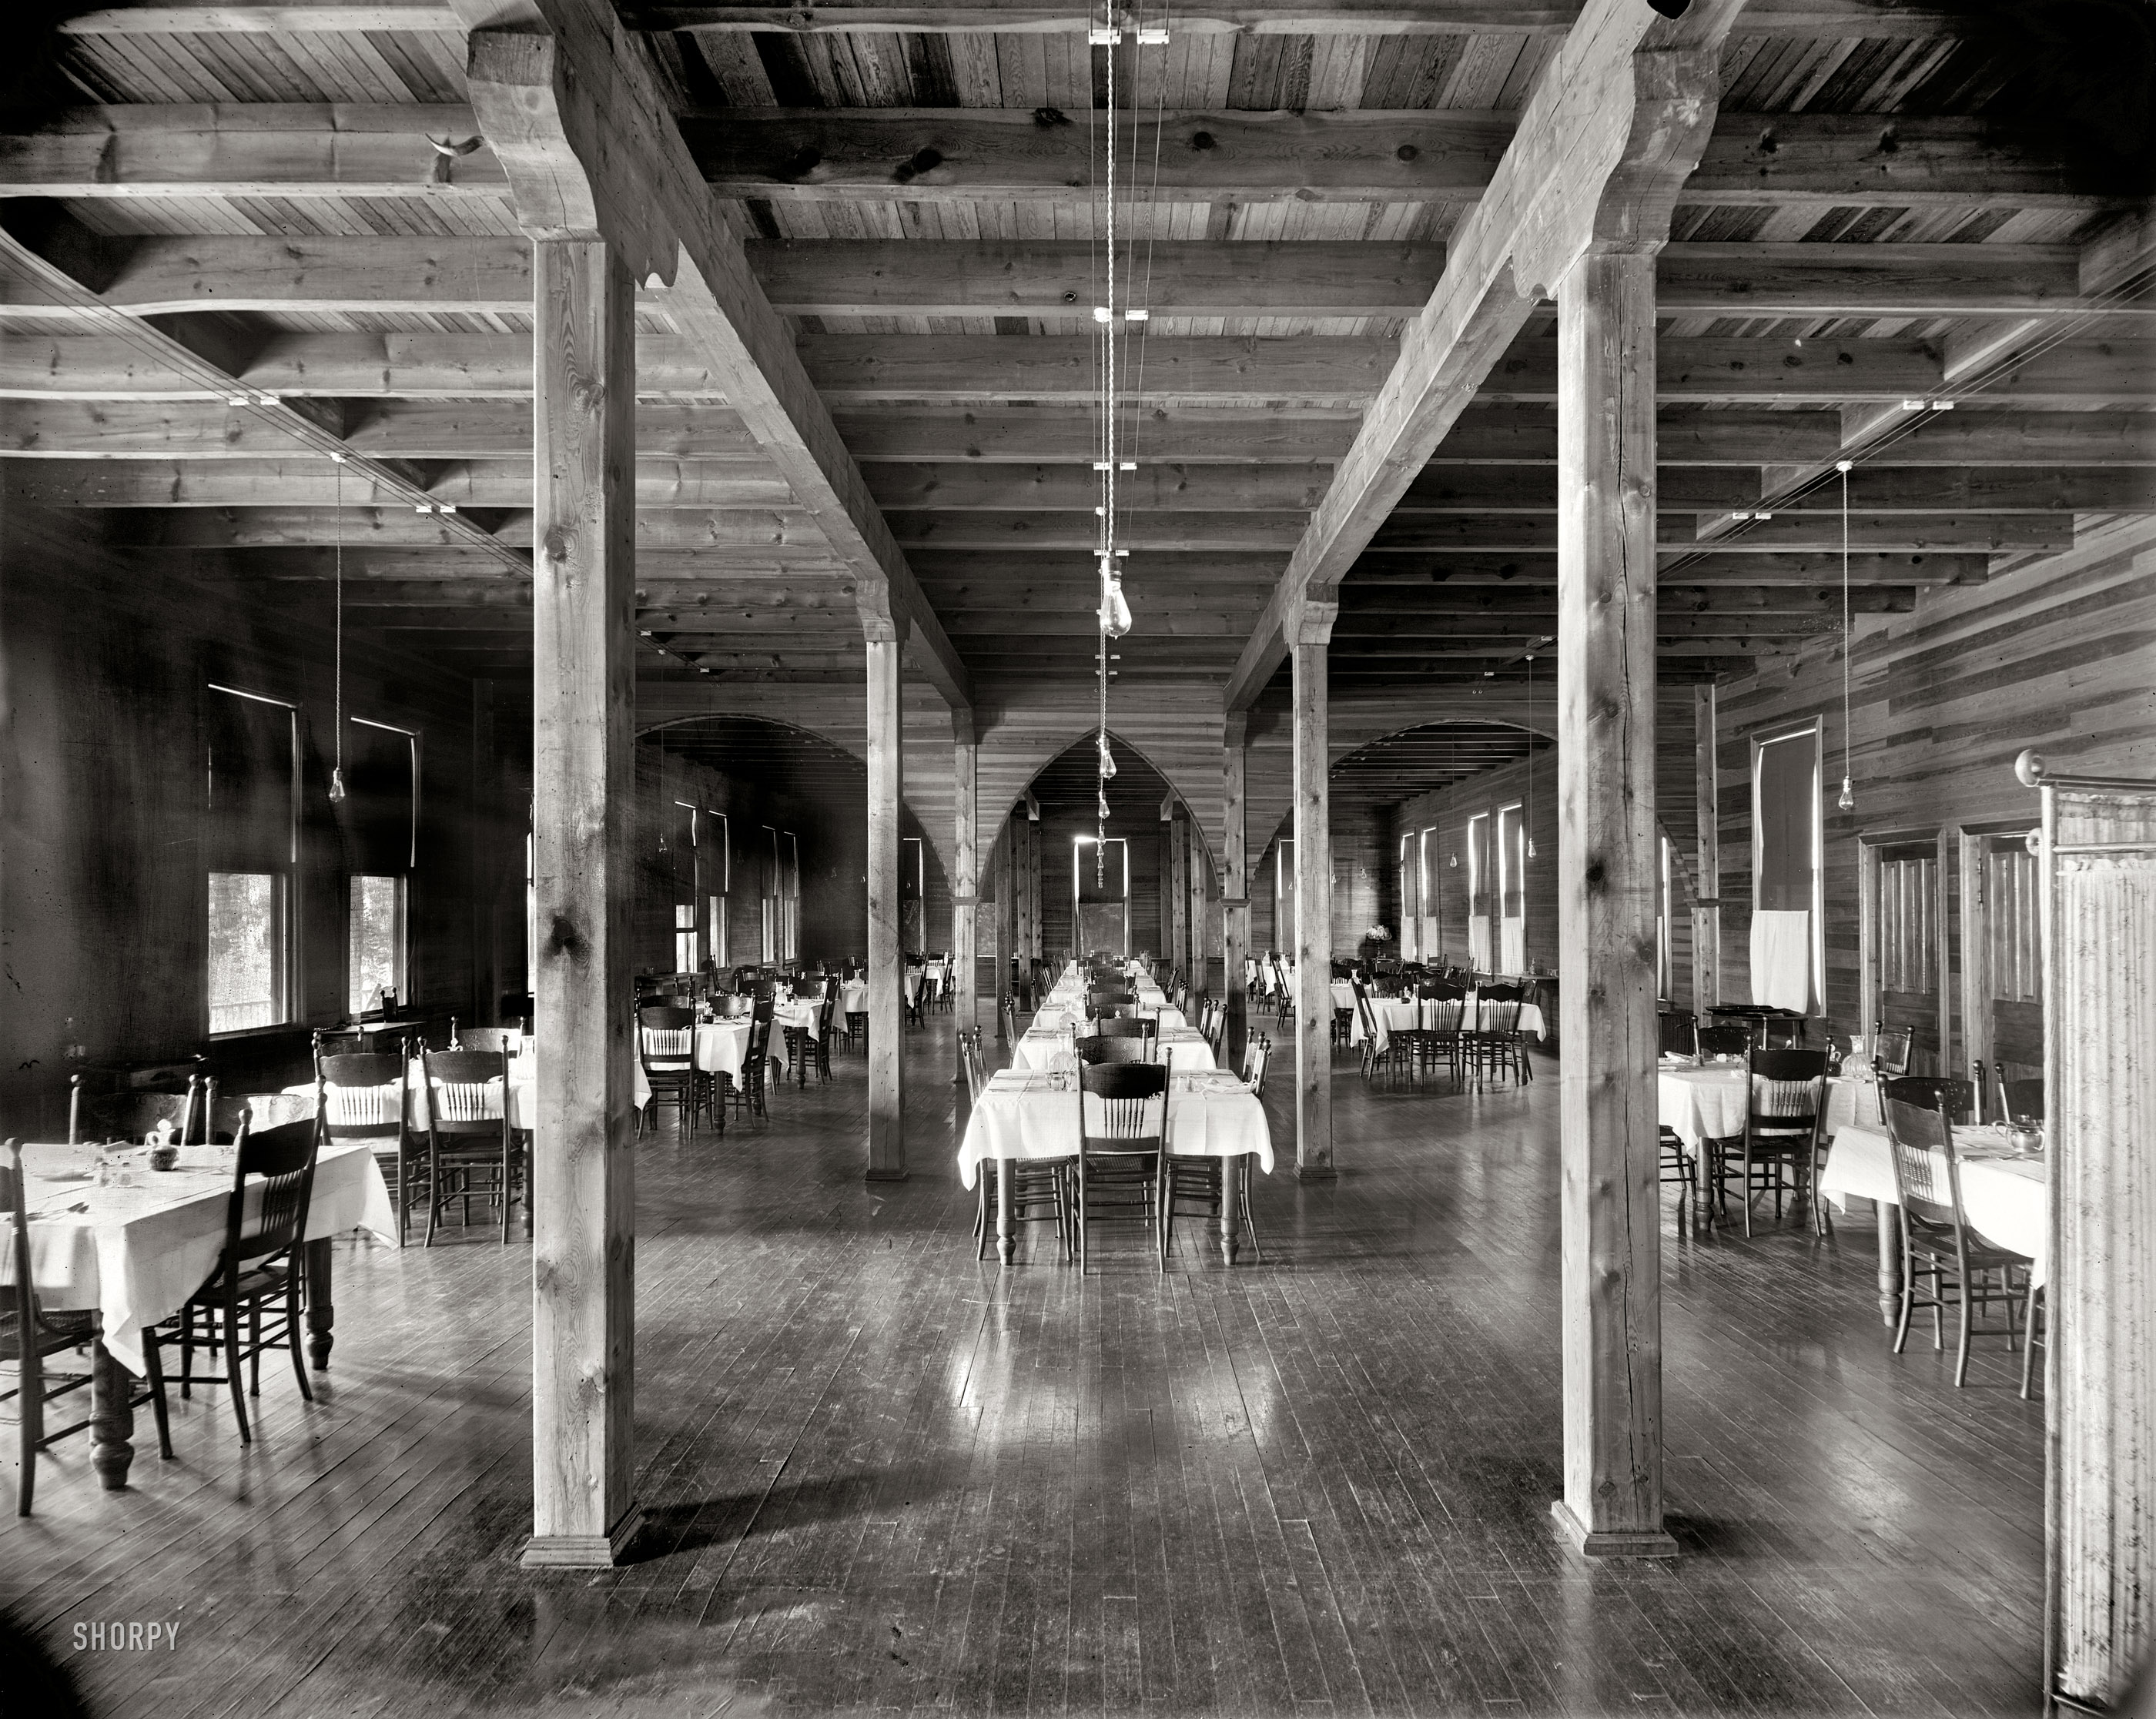 Huron County, Michigan, circa 1900. "Dining room at the Club, Pointe aux Barques." 8x10 inch glass negative, Detroit Publishing Company. View full size.